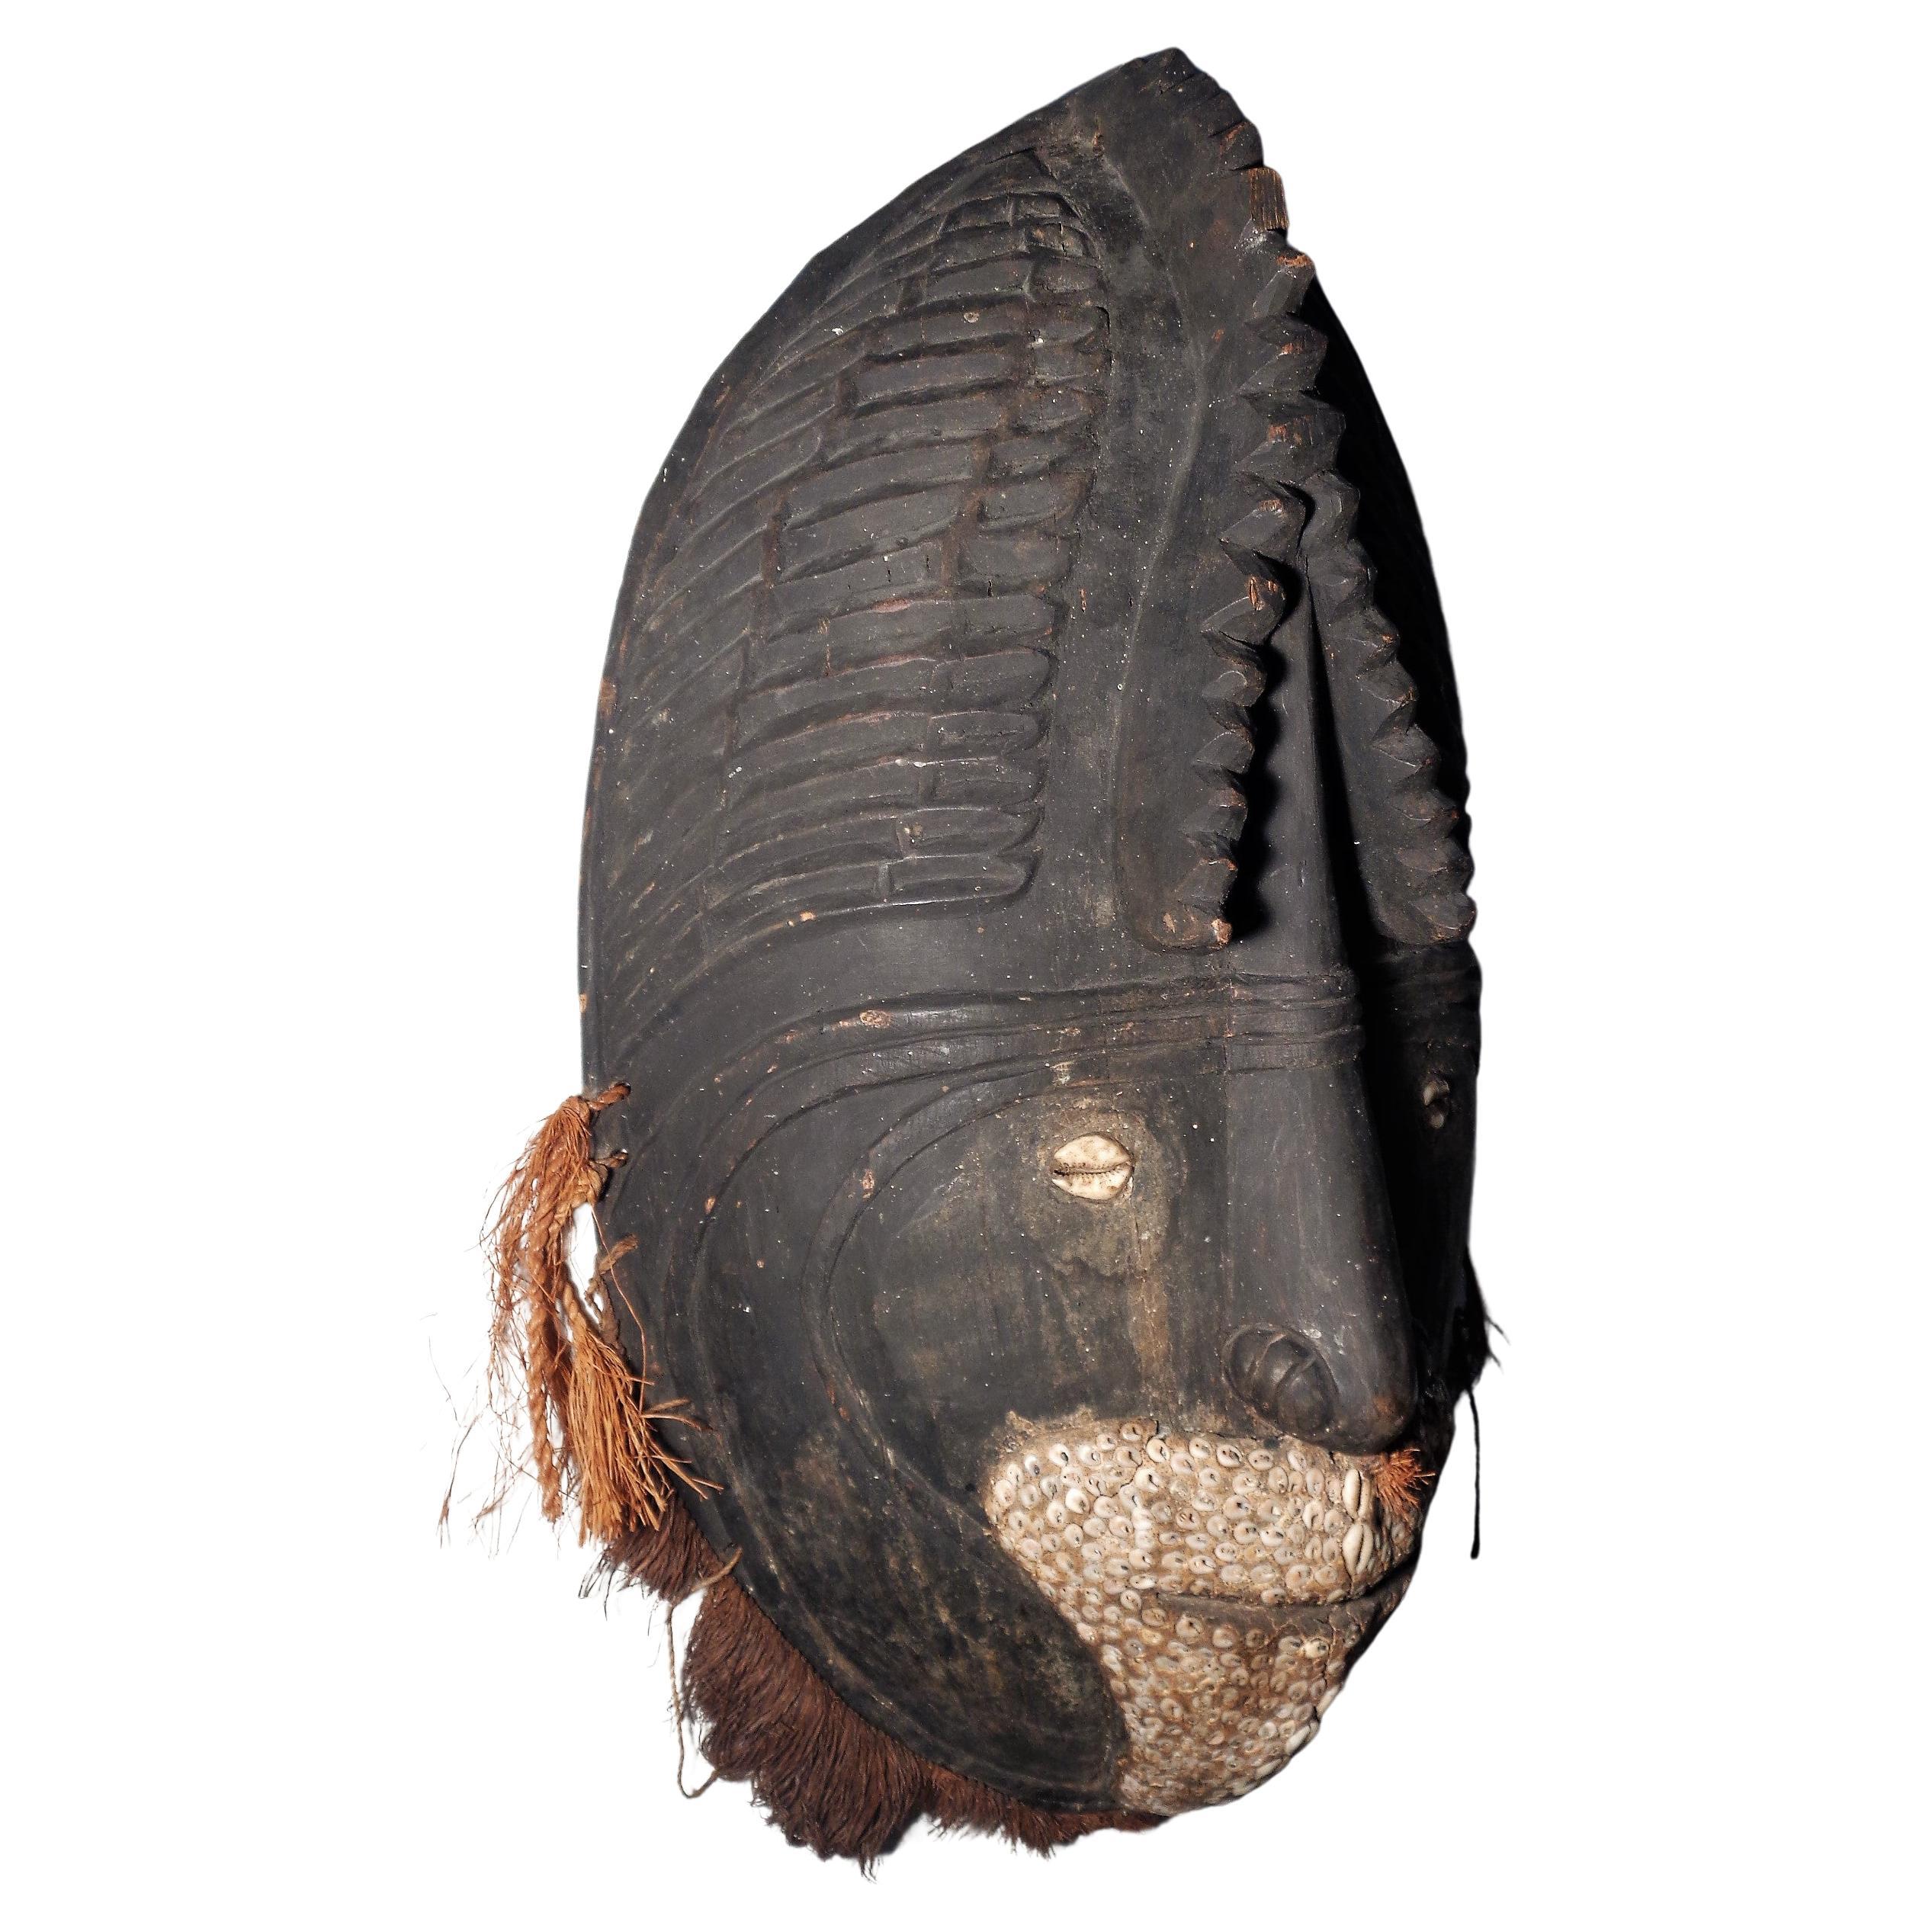 Biwat people mask from the Yuat river region middle Sepik river Papua New Guinea in nicely aged original rich surface color patina to wood, shells and natural fibers. Circa 1980. Look at all pictures and read condition report in comment section.